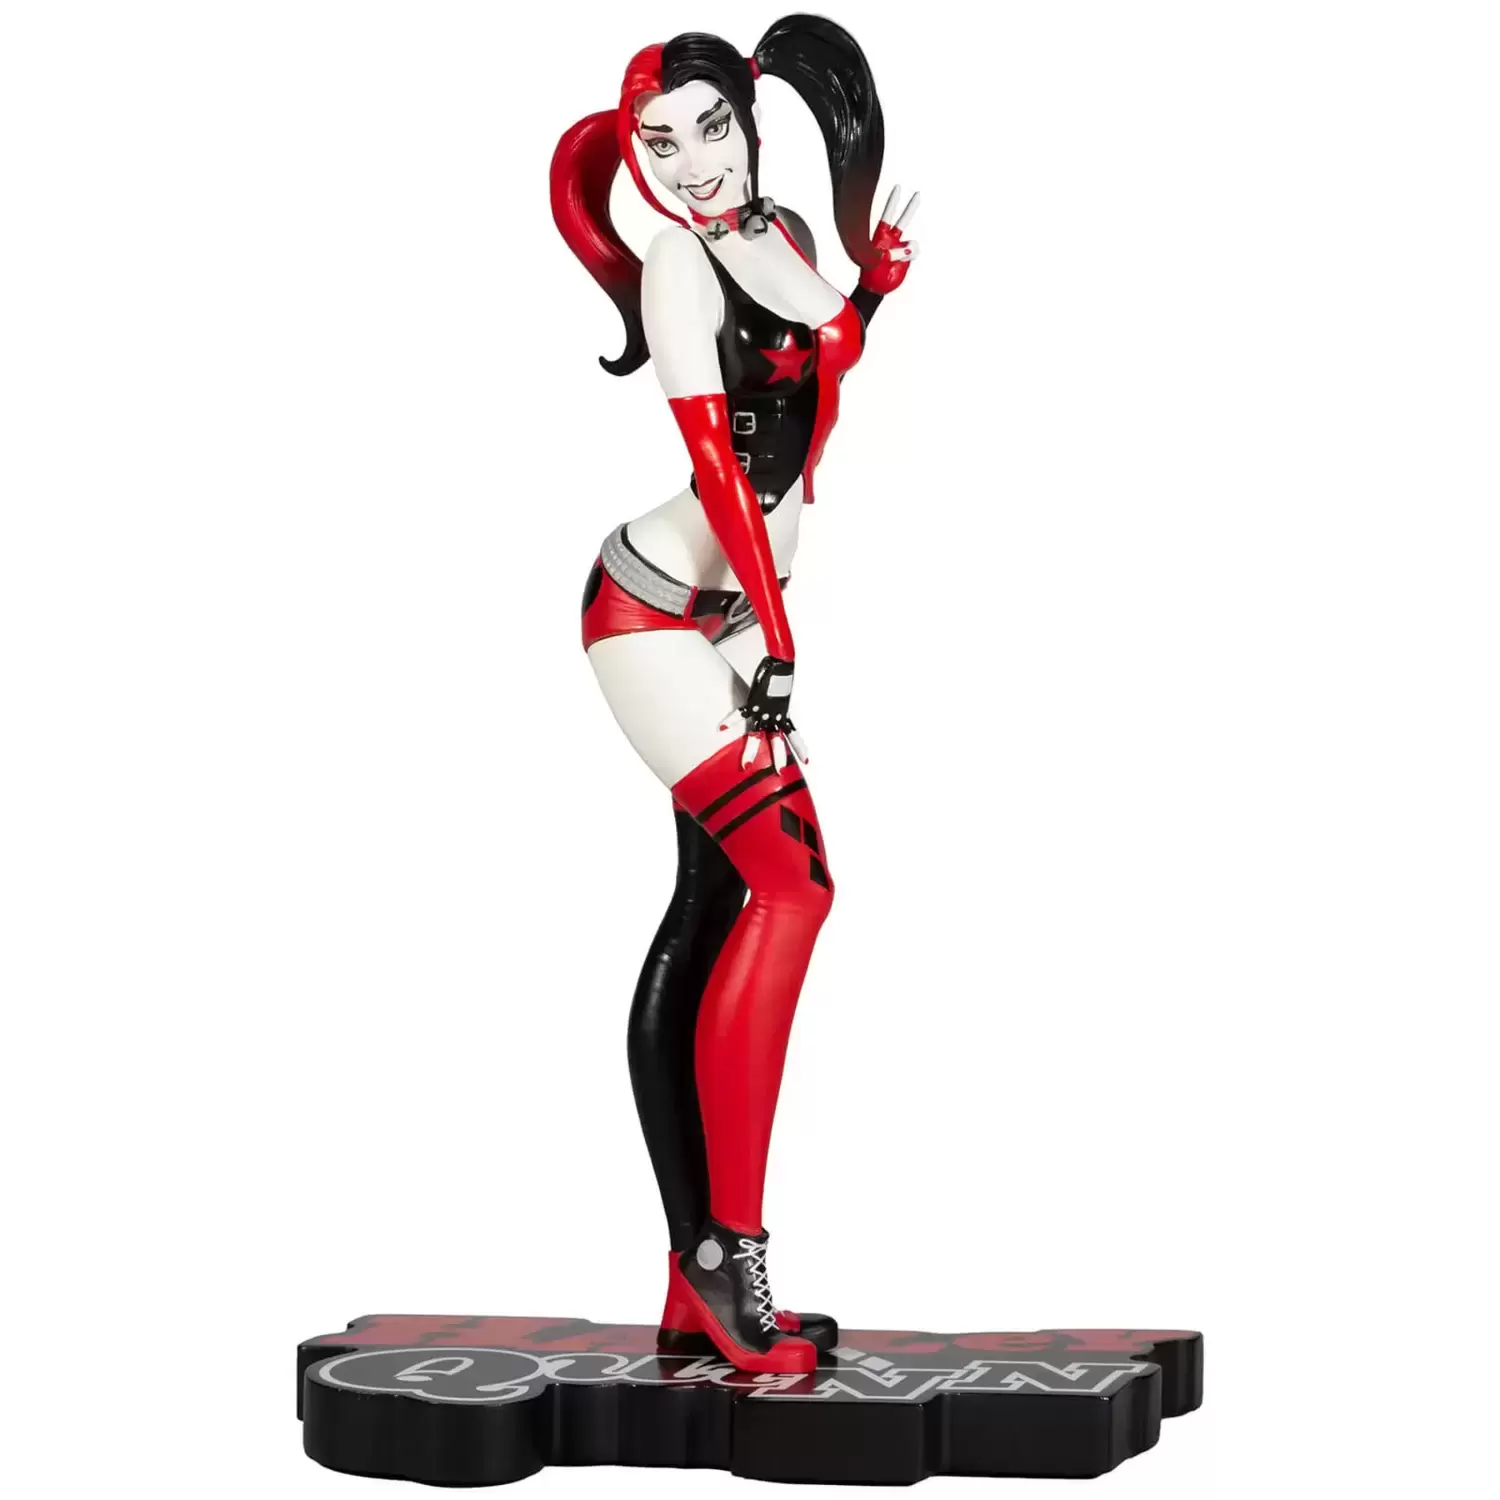 DC Collectibles Statues - Harley Quinn - Red, White & Black by J. Scott Campbell - DC Direct